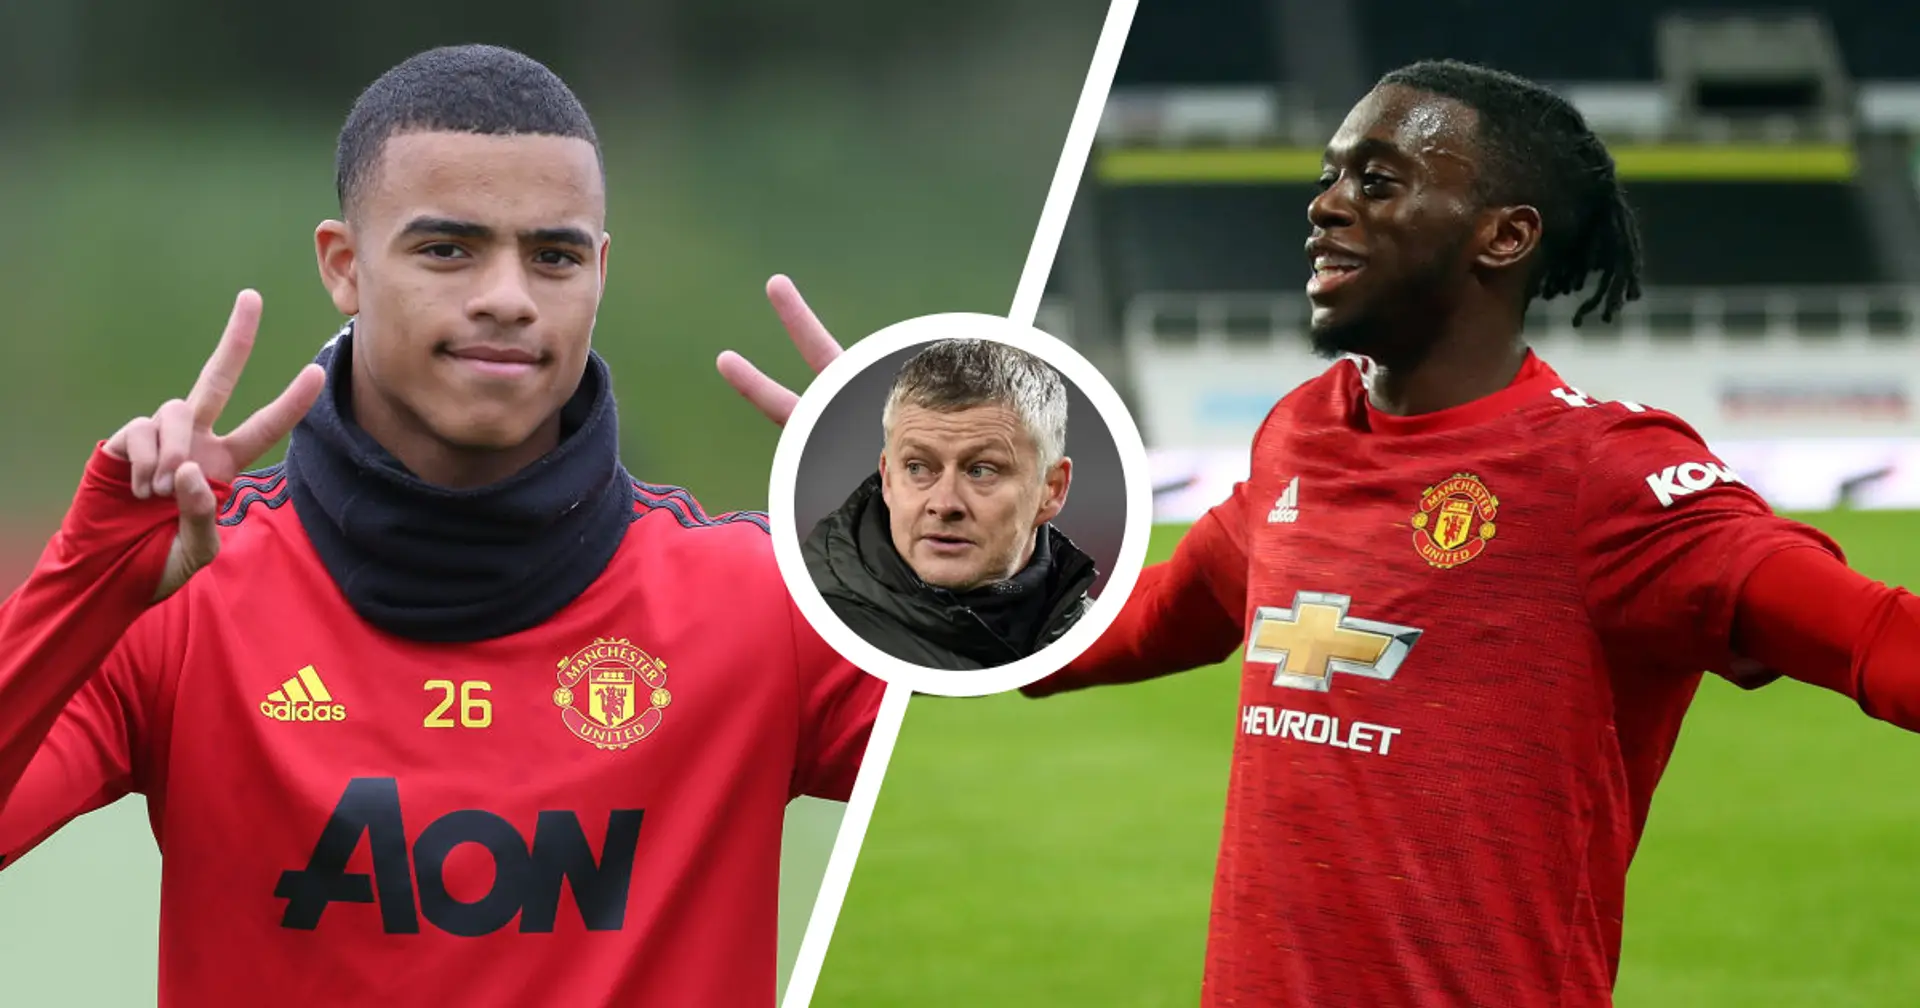 'They can form a good right side': Ole backs Aaron Wan-Bissaka and Mason Greenwood partnership to flourish